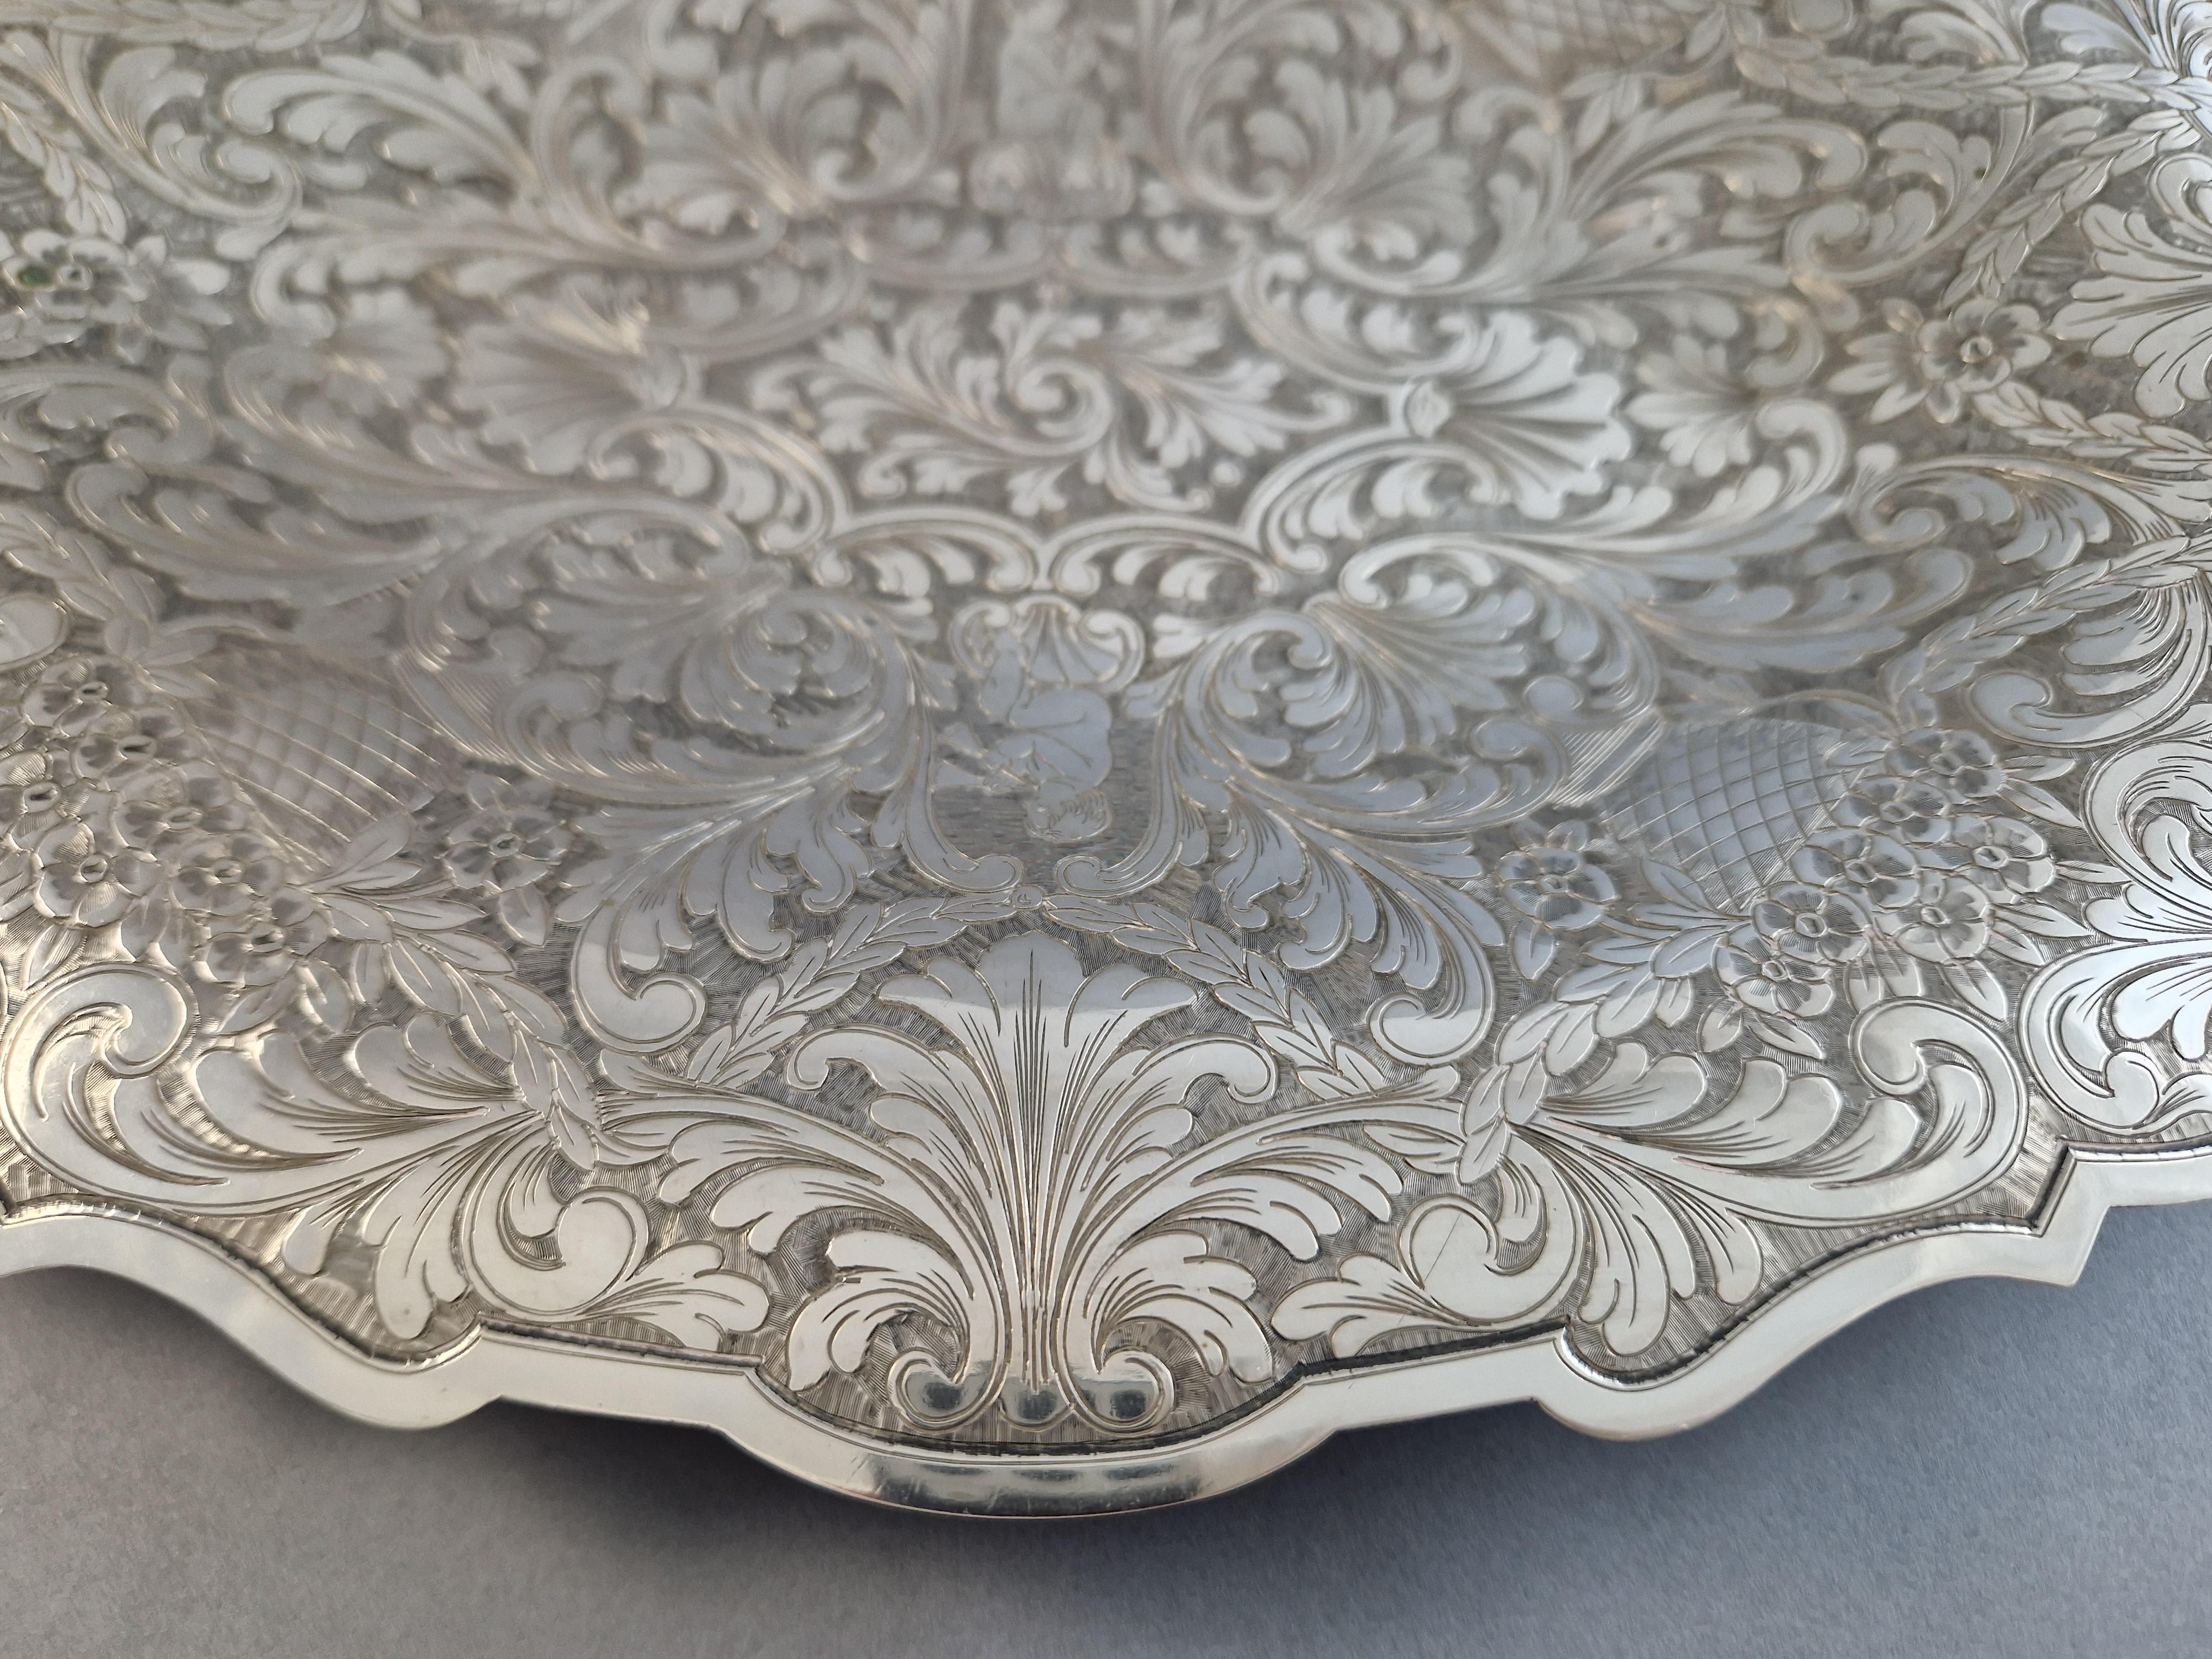 Sterling Silver tray with 4 feets by Mario Buccellati

Finely engraved of foliages and flowers

Silversmith hallmark: Mario Buccellati
Silver hallmark: 800